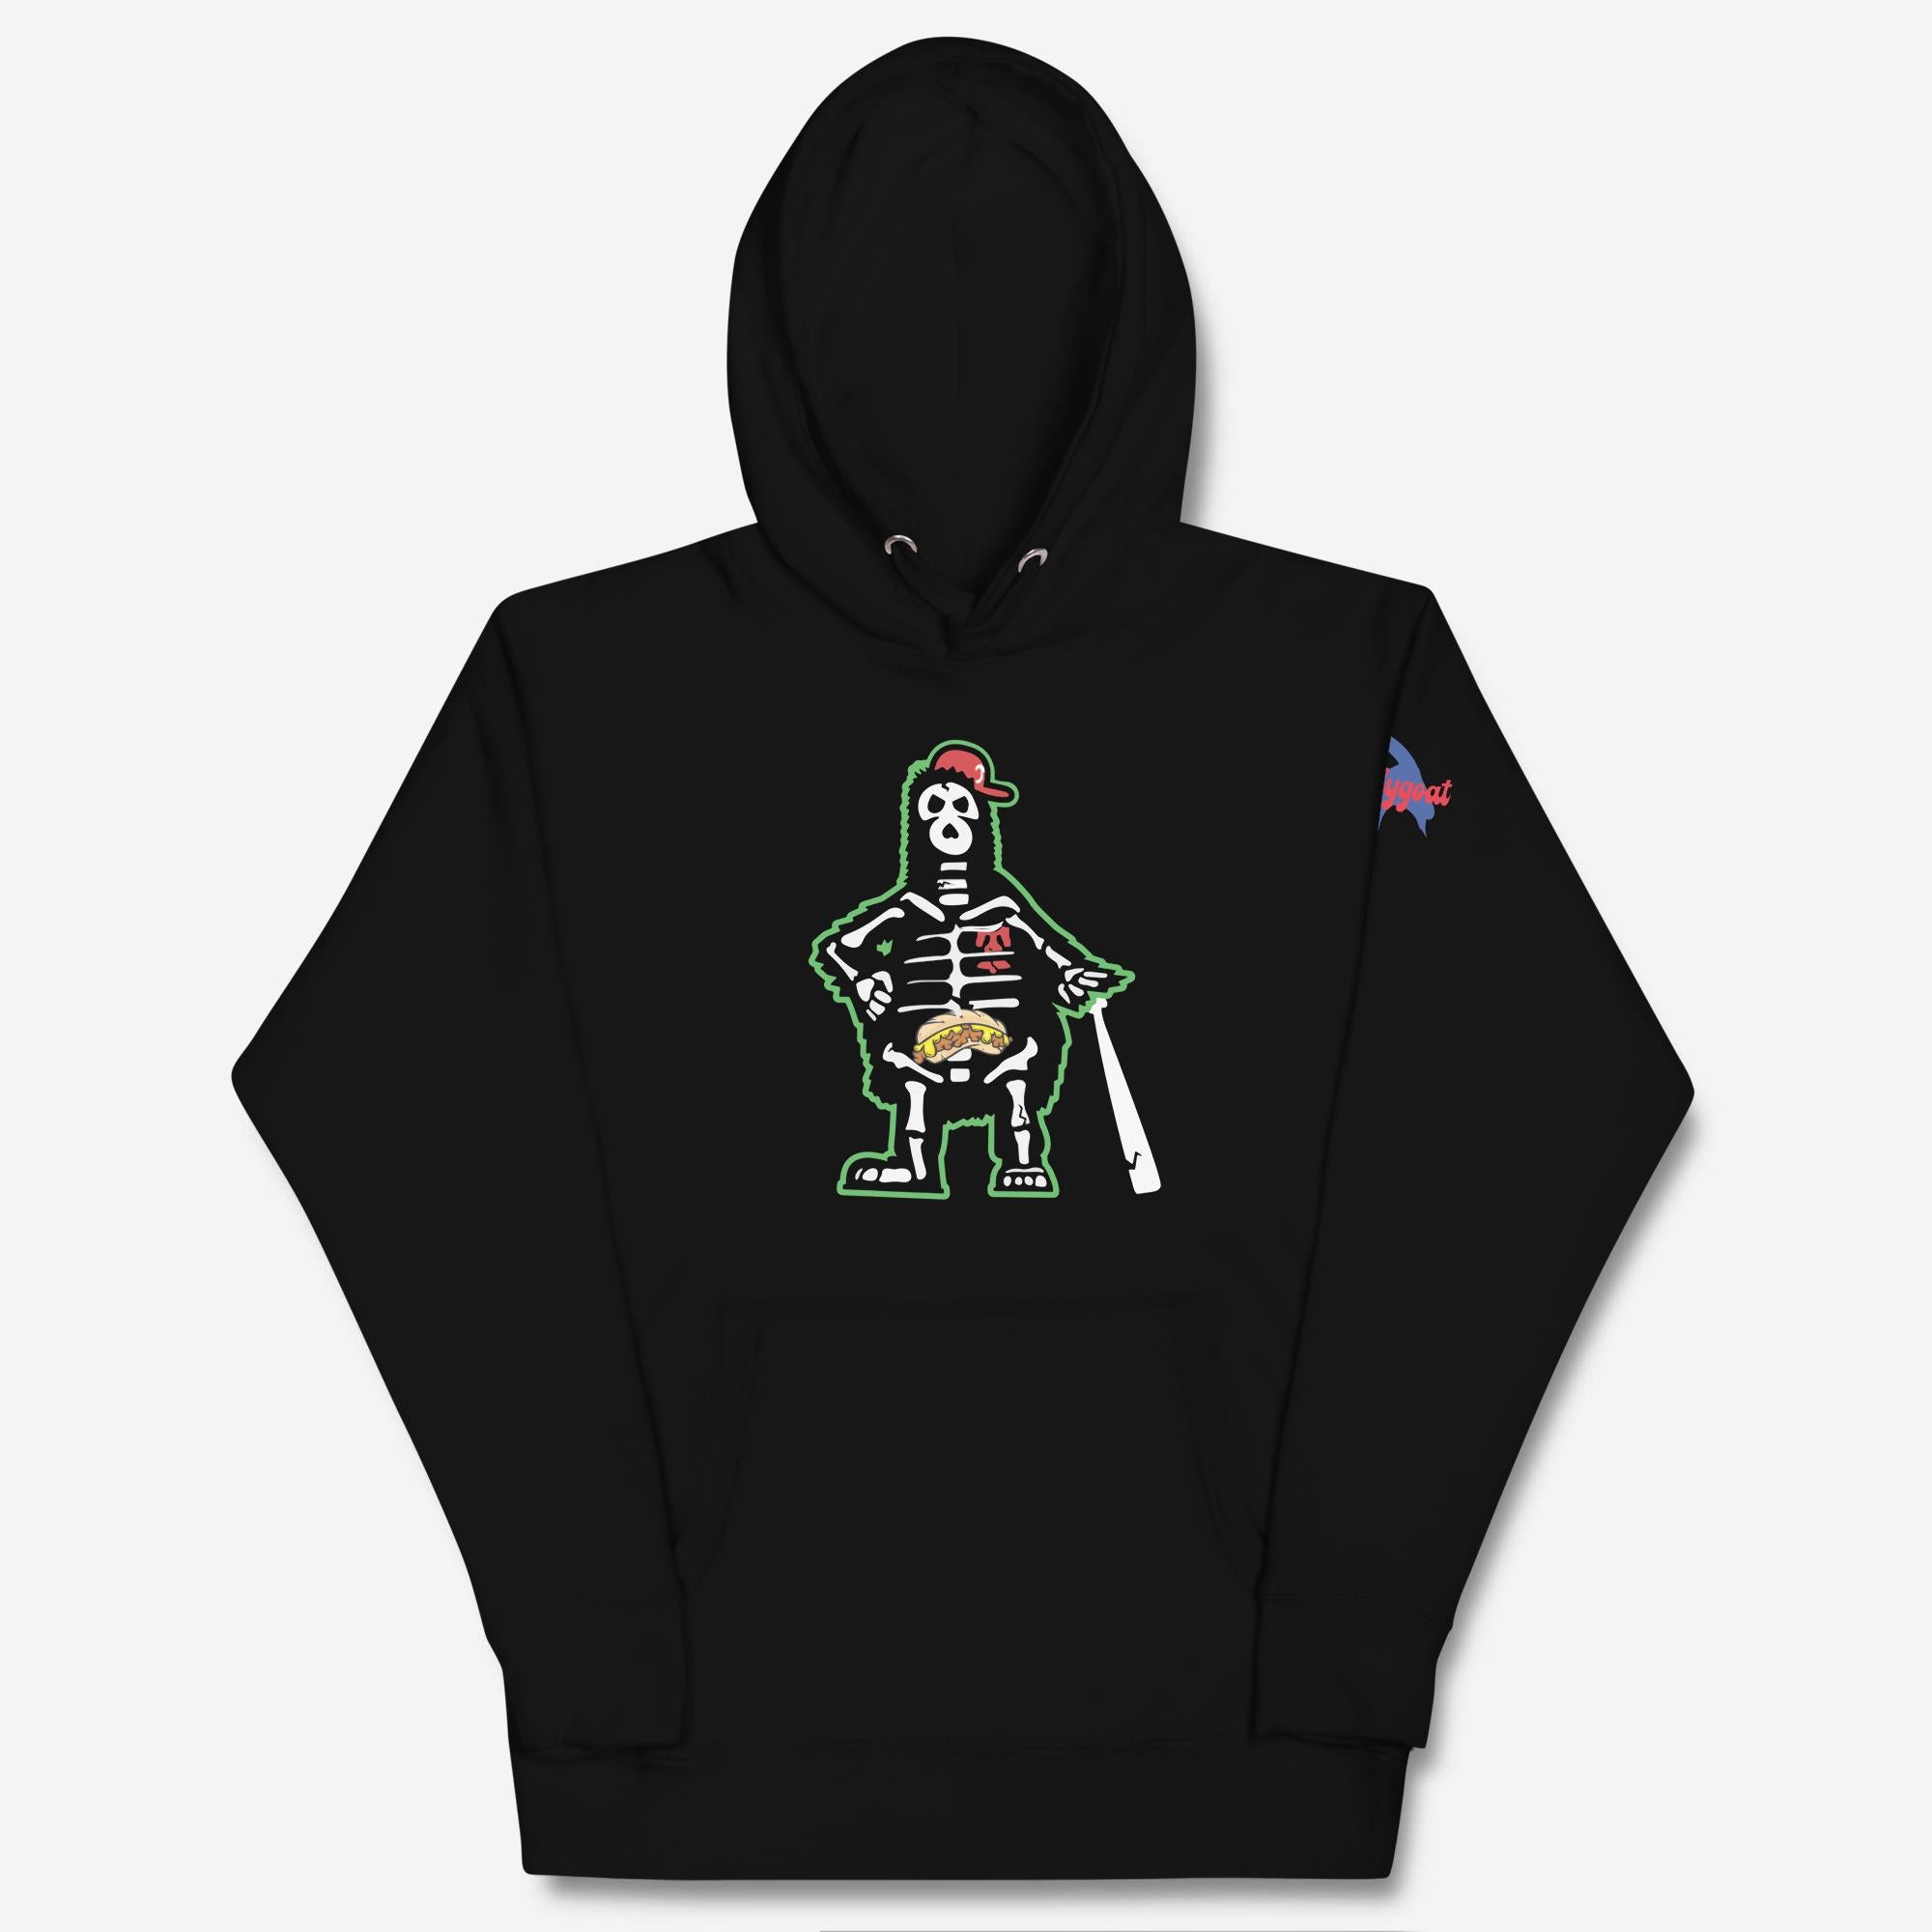 "Philly Phan to the Bone" Hoodie